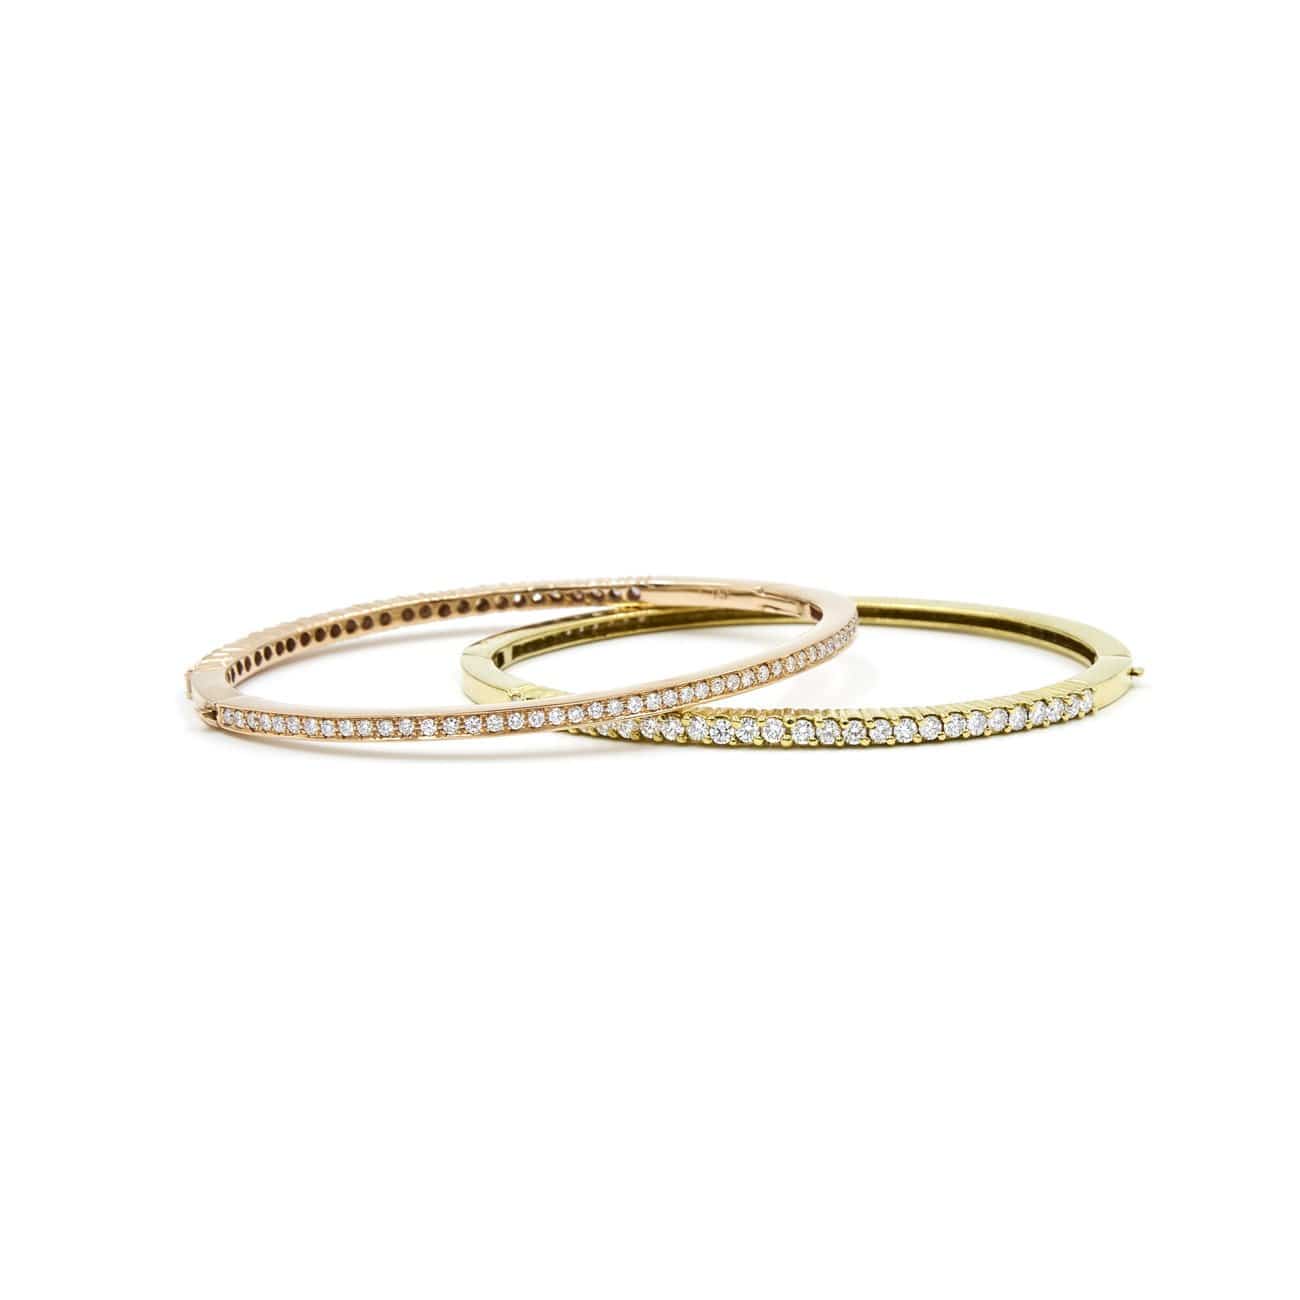 TWO- IN -ONE DIAMOND BANGLE - Chris Aire Fine Jewelry & Timepieces